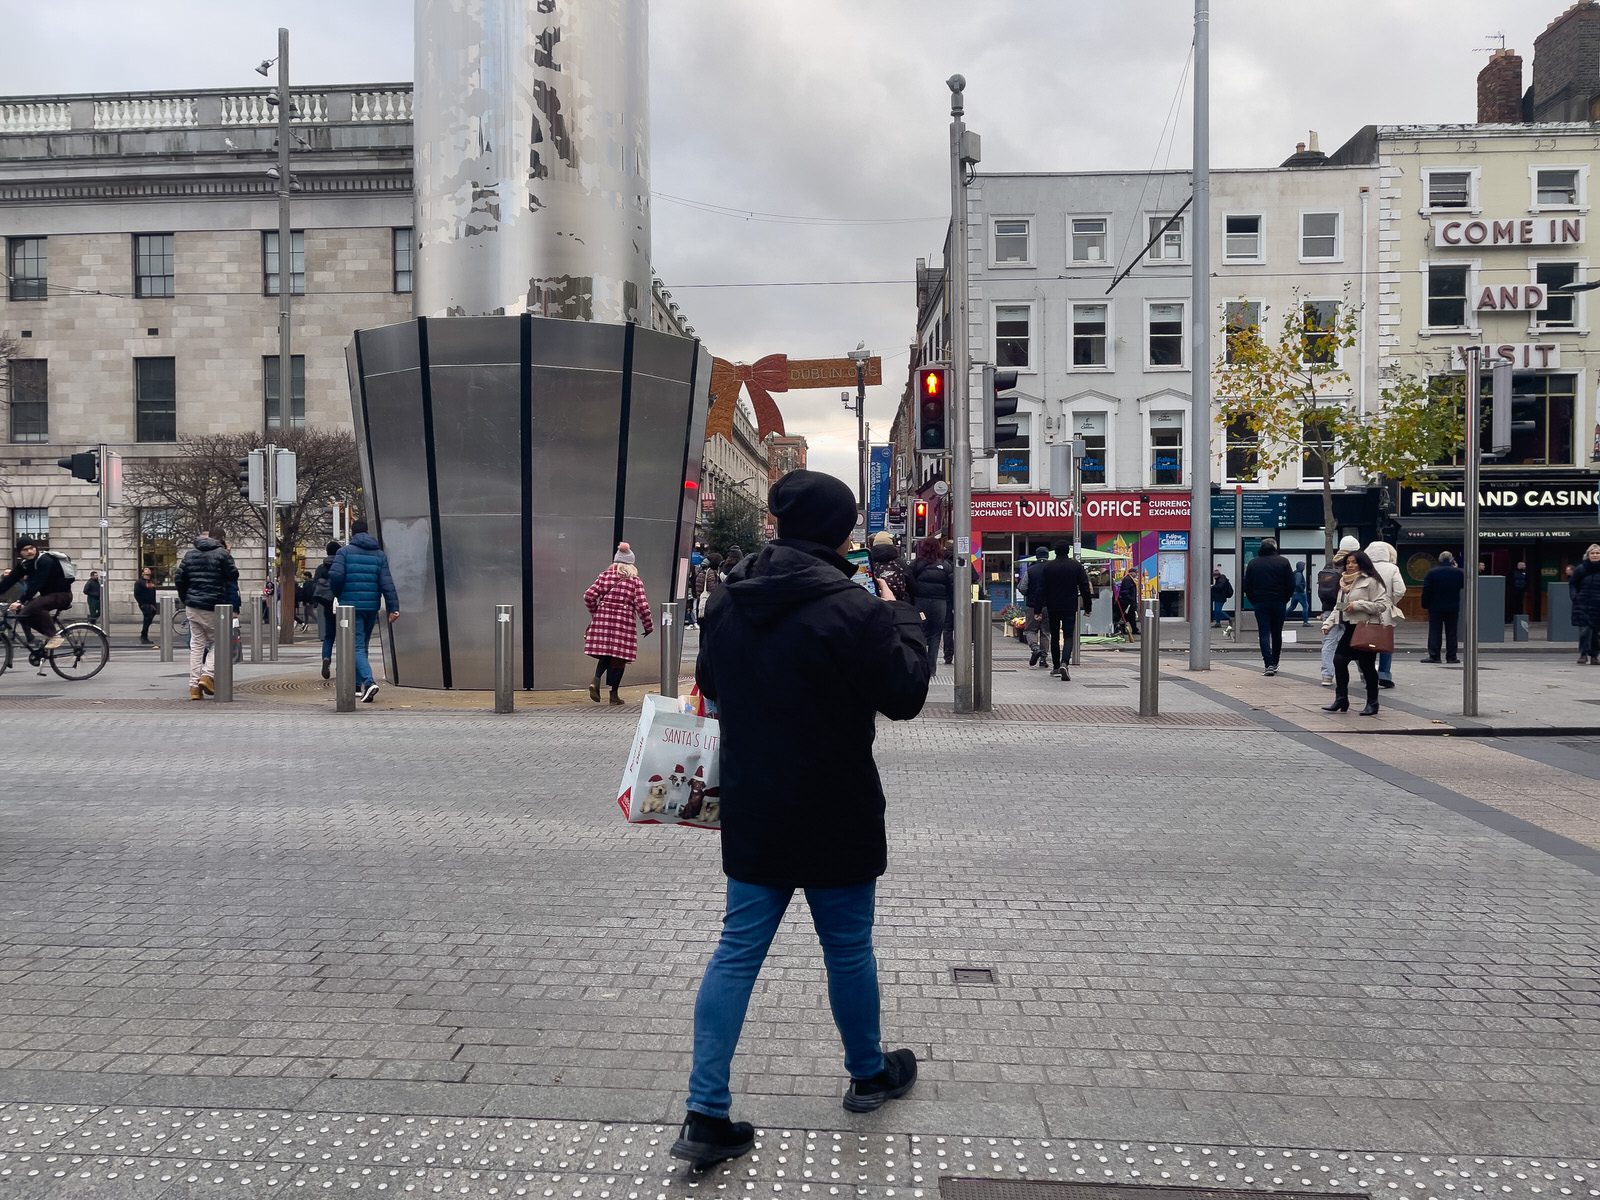 DUBLIN CITY CENTRE [THE DAY AFTER THE RIOT AND LITTLE TO SEE]-225316-1